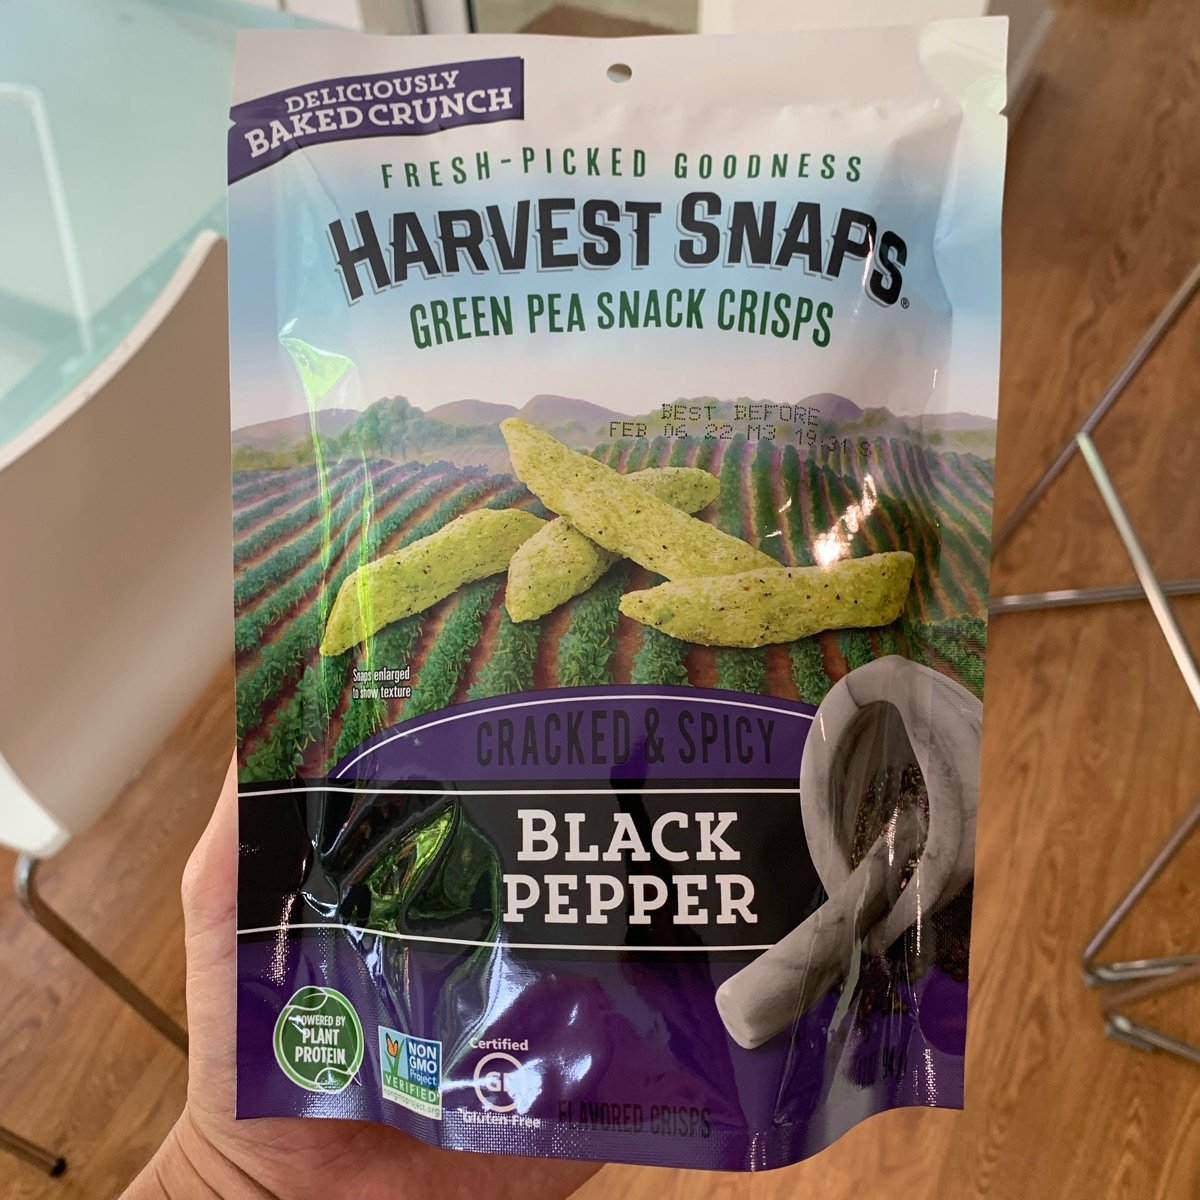 Harvest Snaps Black Pepper and Rosemary Pea Crisps Reviews